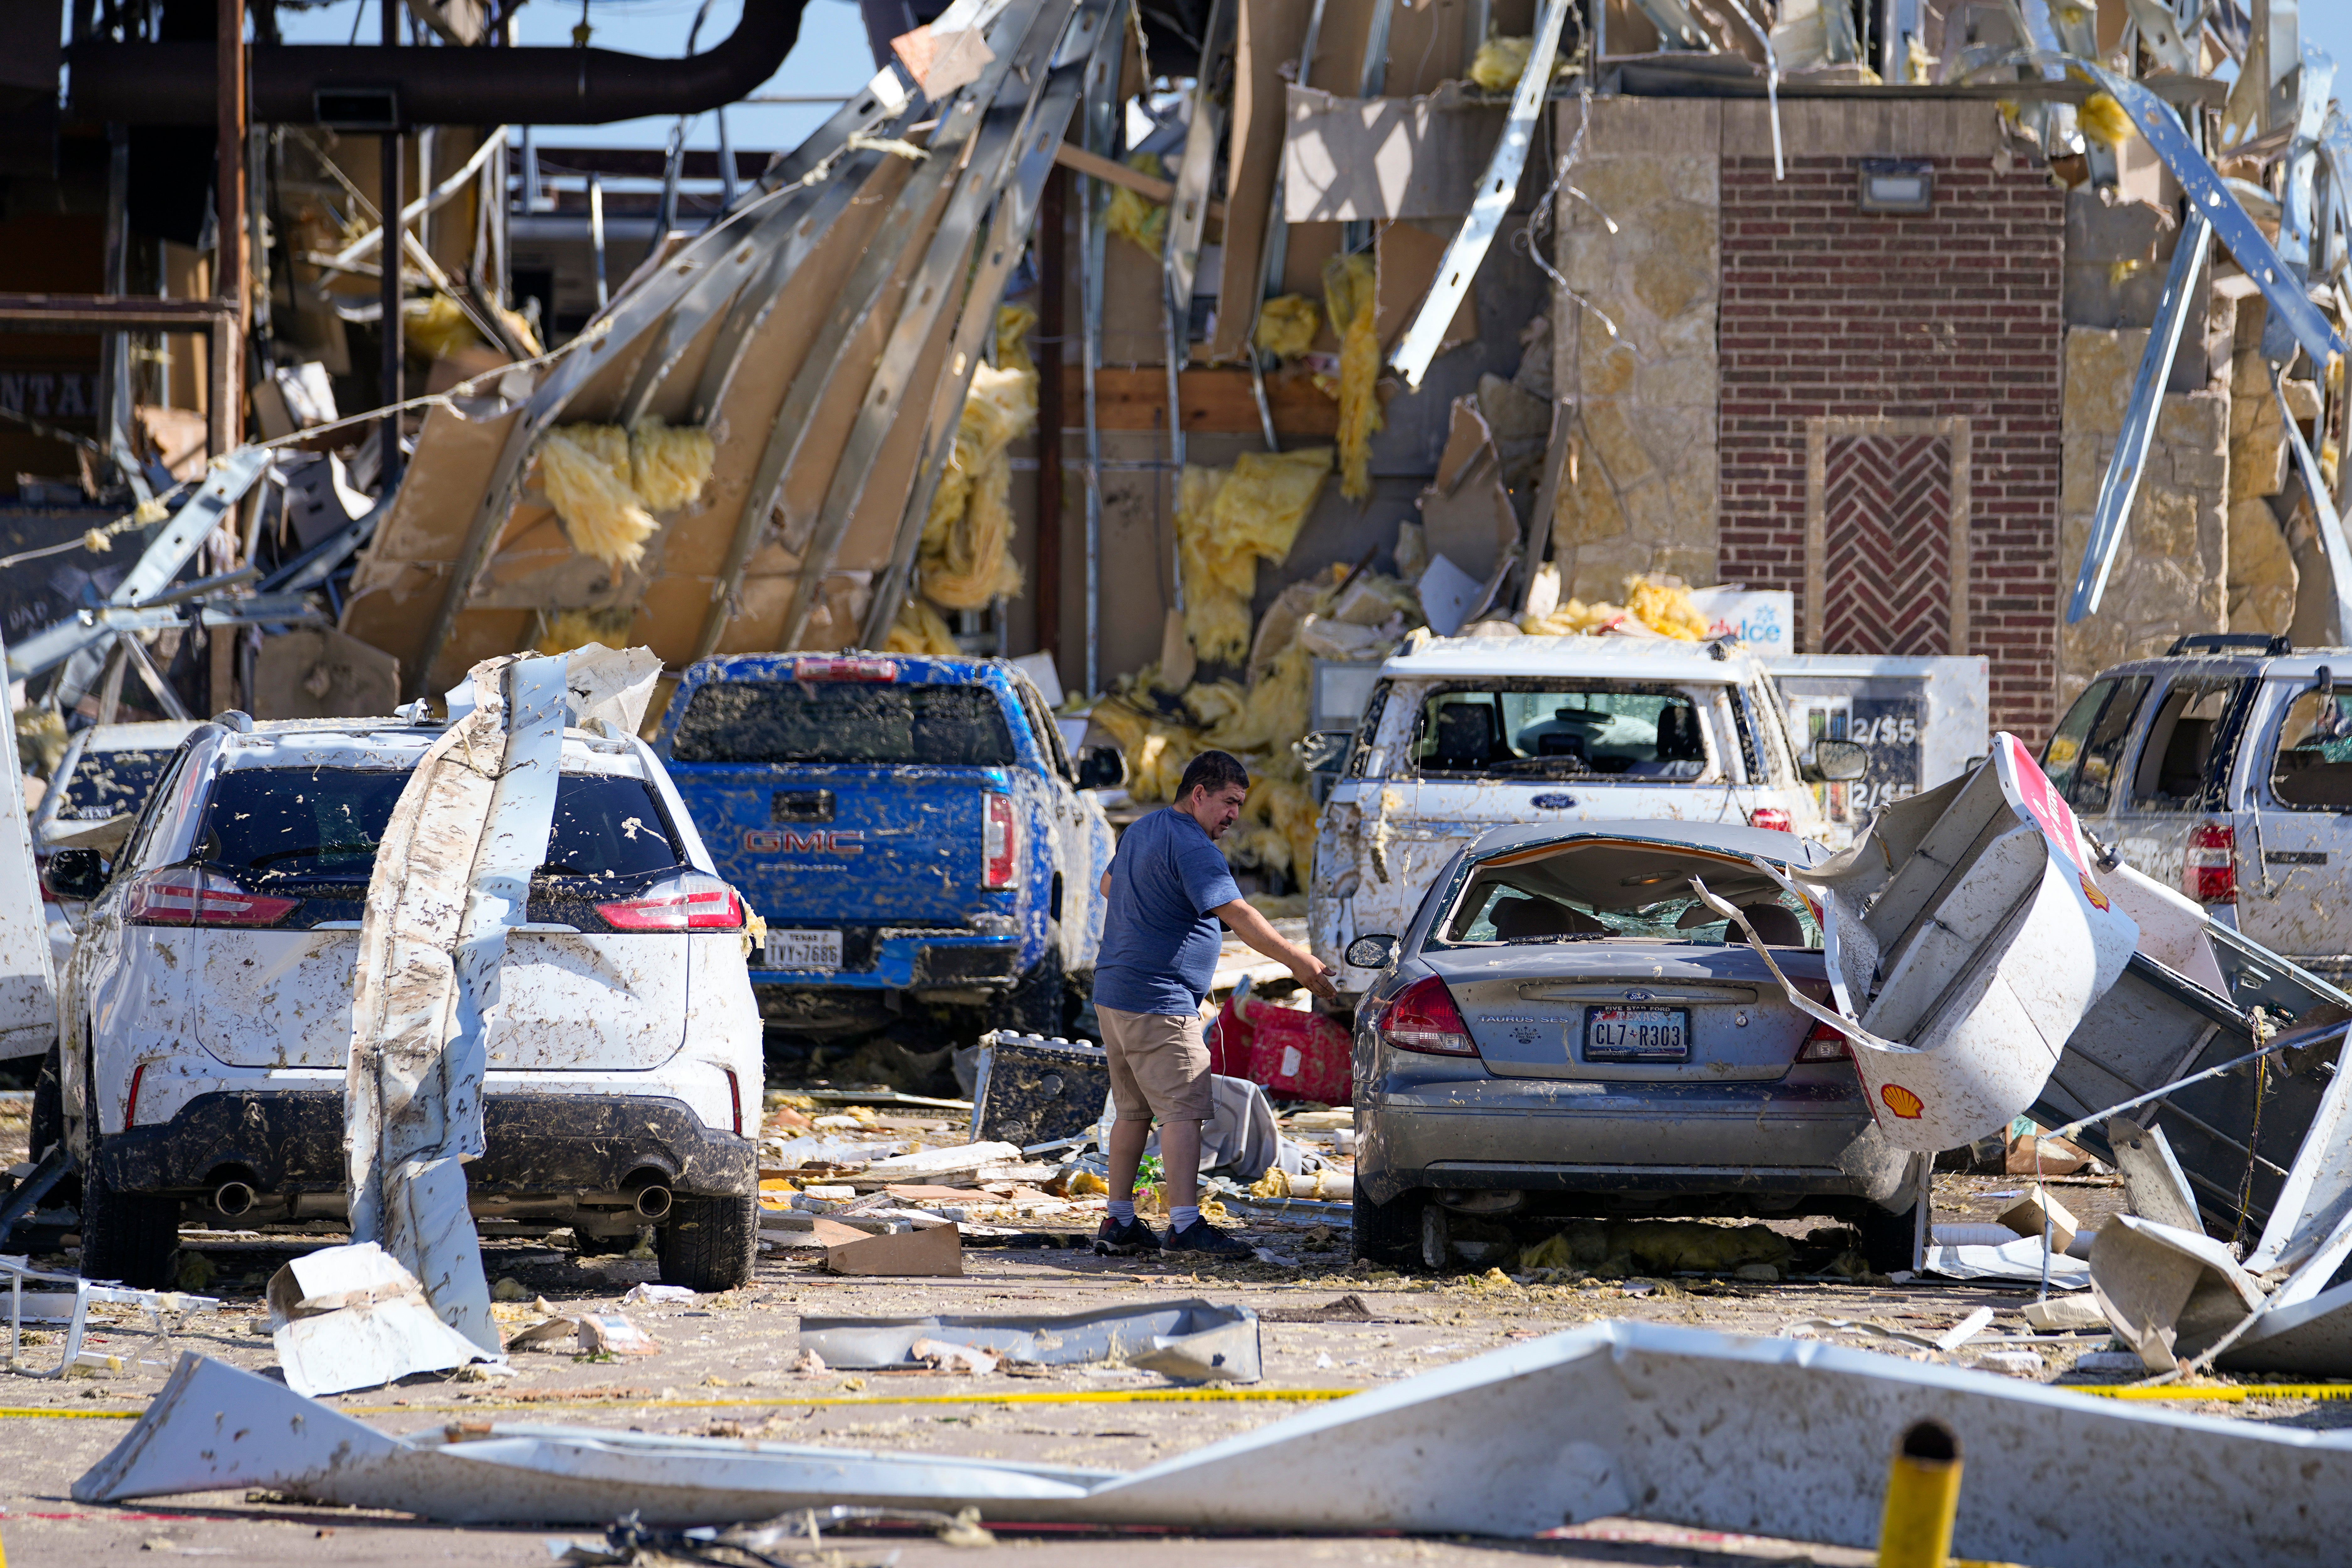 Damaged cars and buildings after a tornado hit Texas